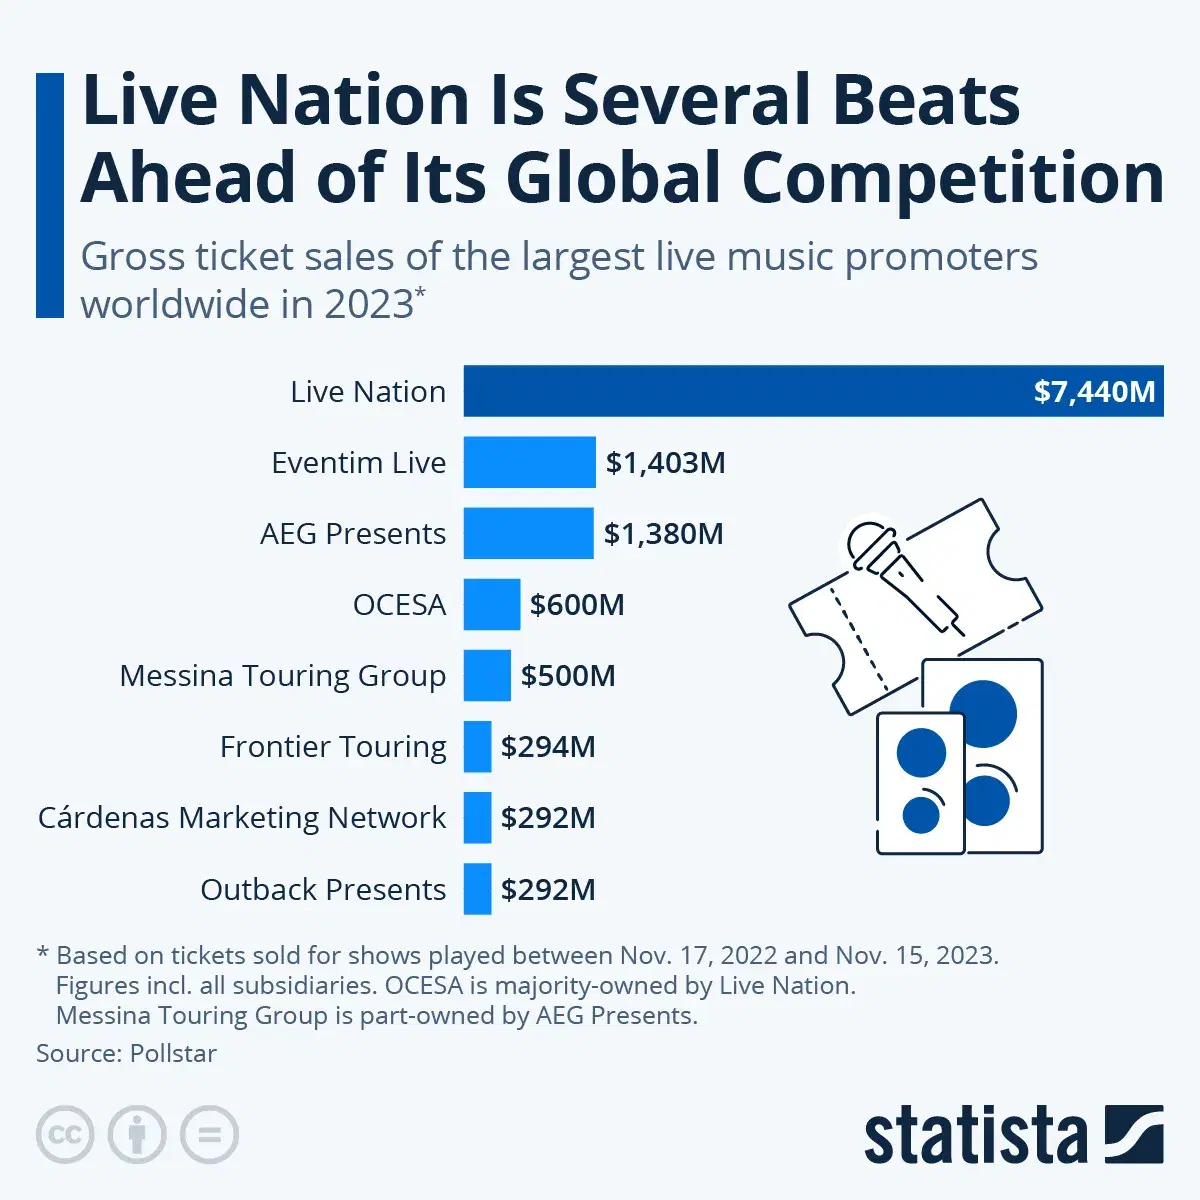 Live Nation Is Several Beats Ahead of Its Global Competition